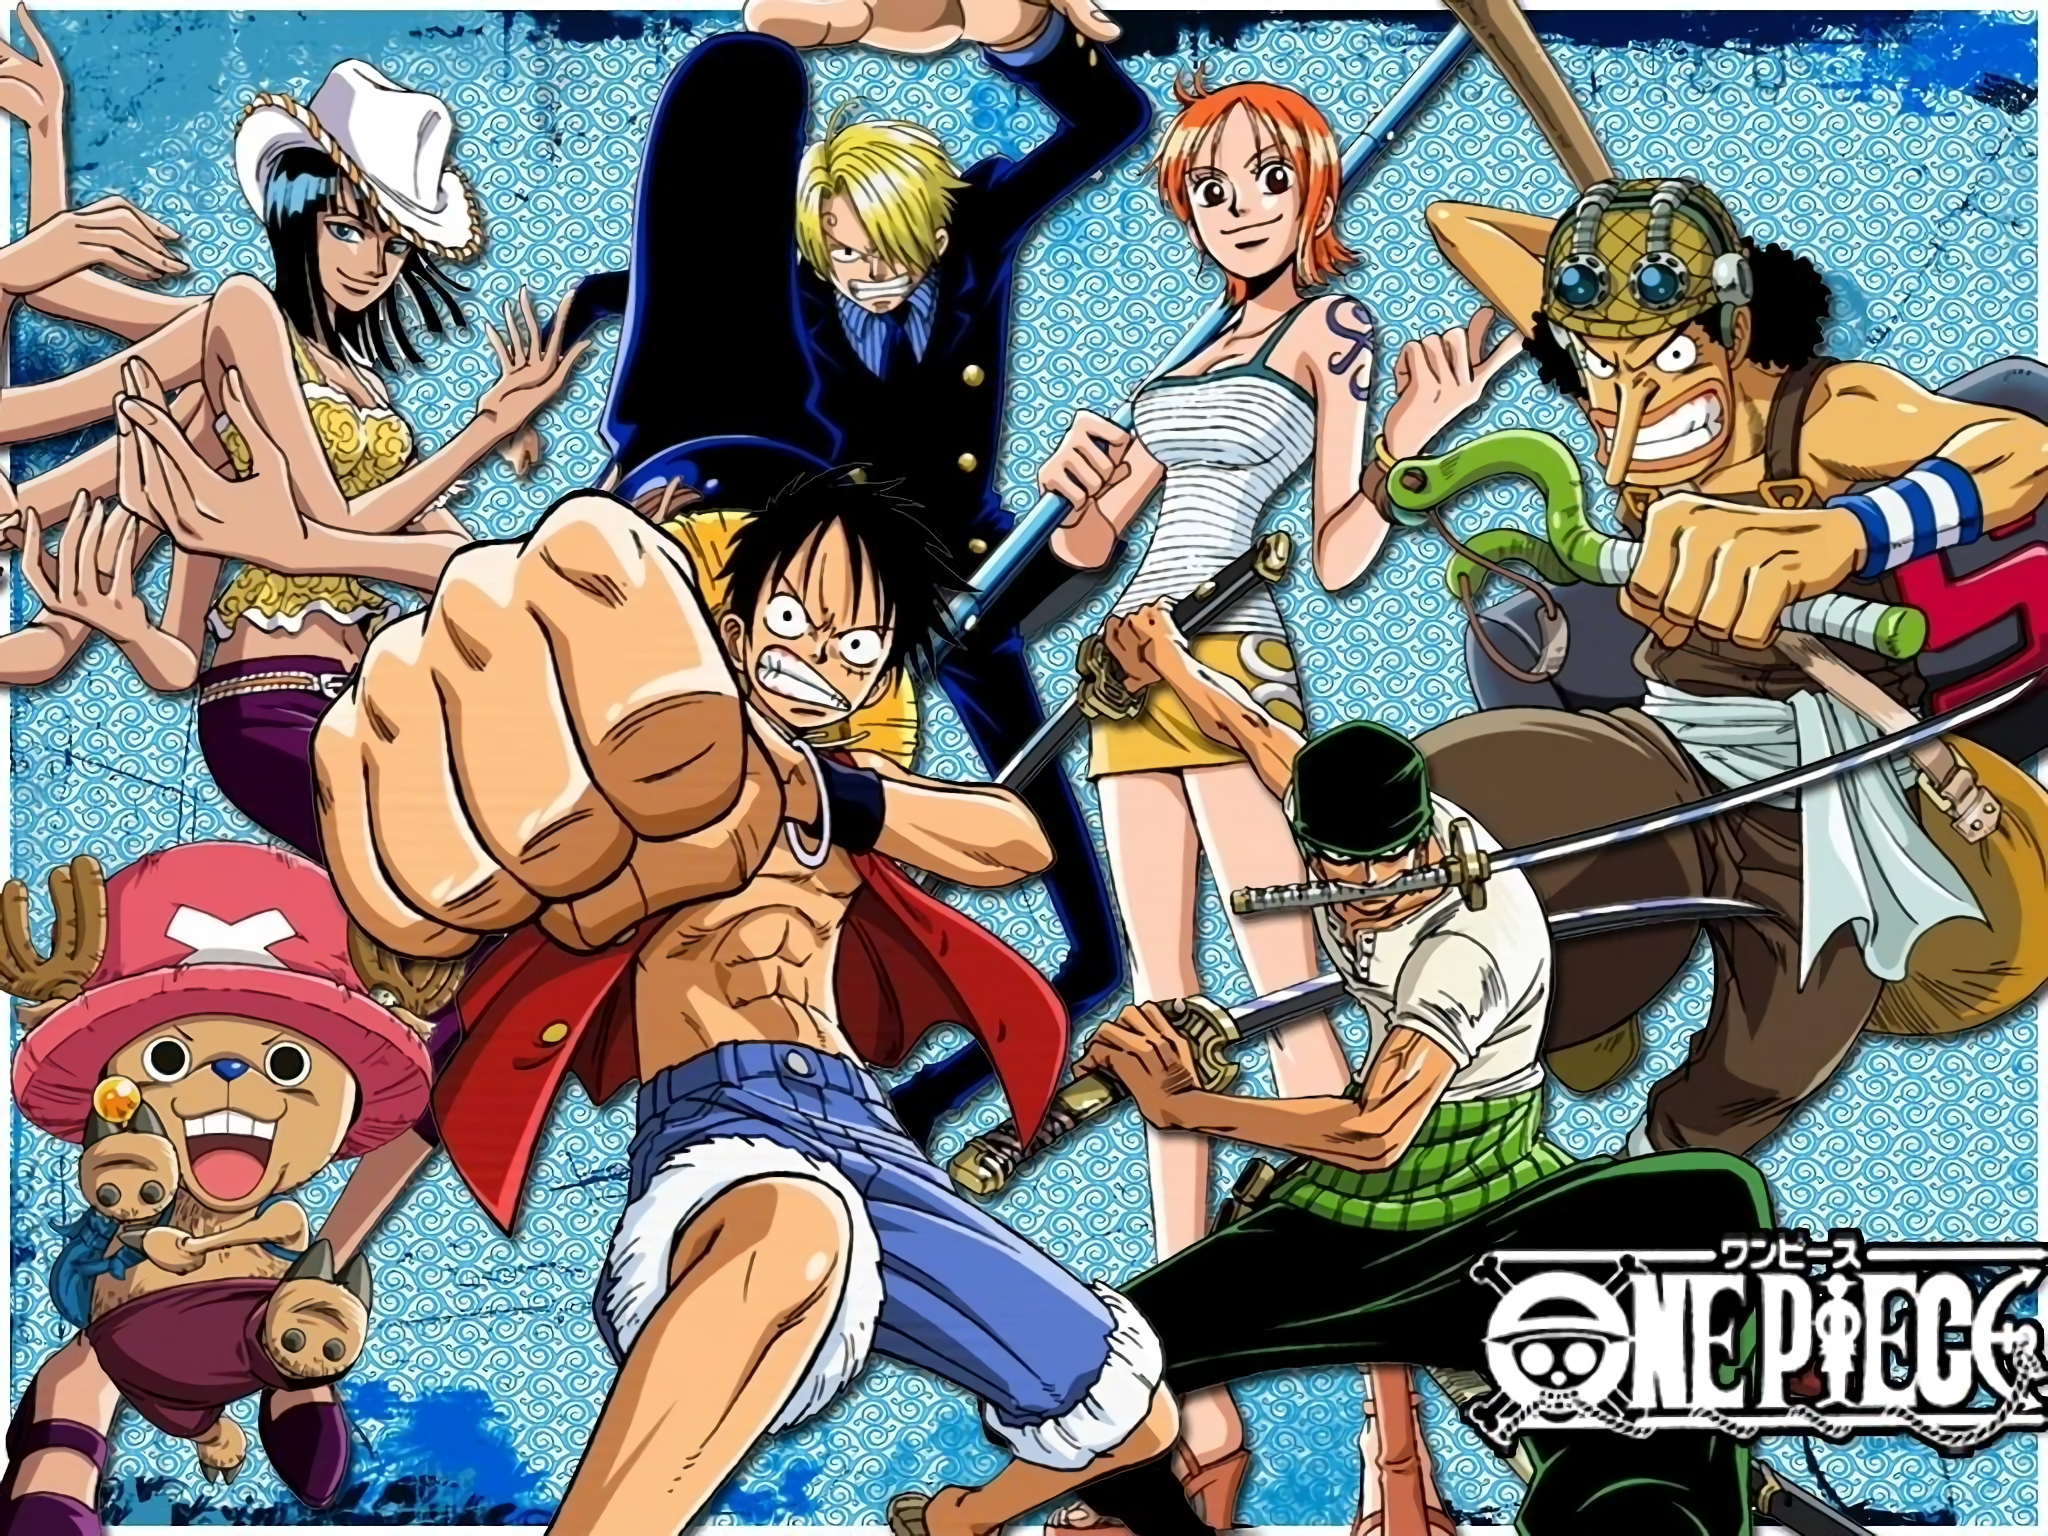 The Straw Hat Pirates from One Piece, featuring Luffy, Nami, Robin, Sanji, Usopp, Zoro, and Chopper.